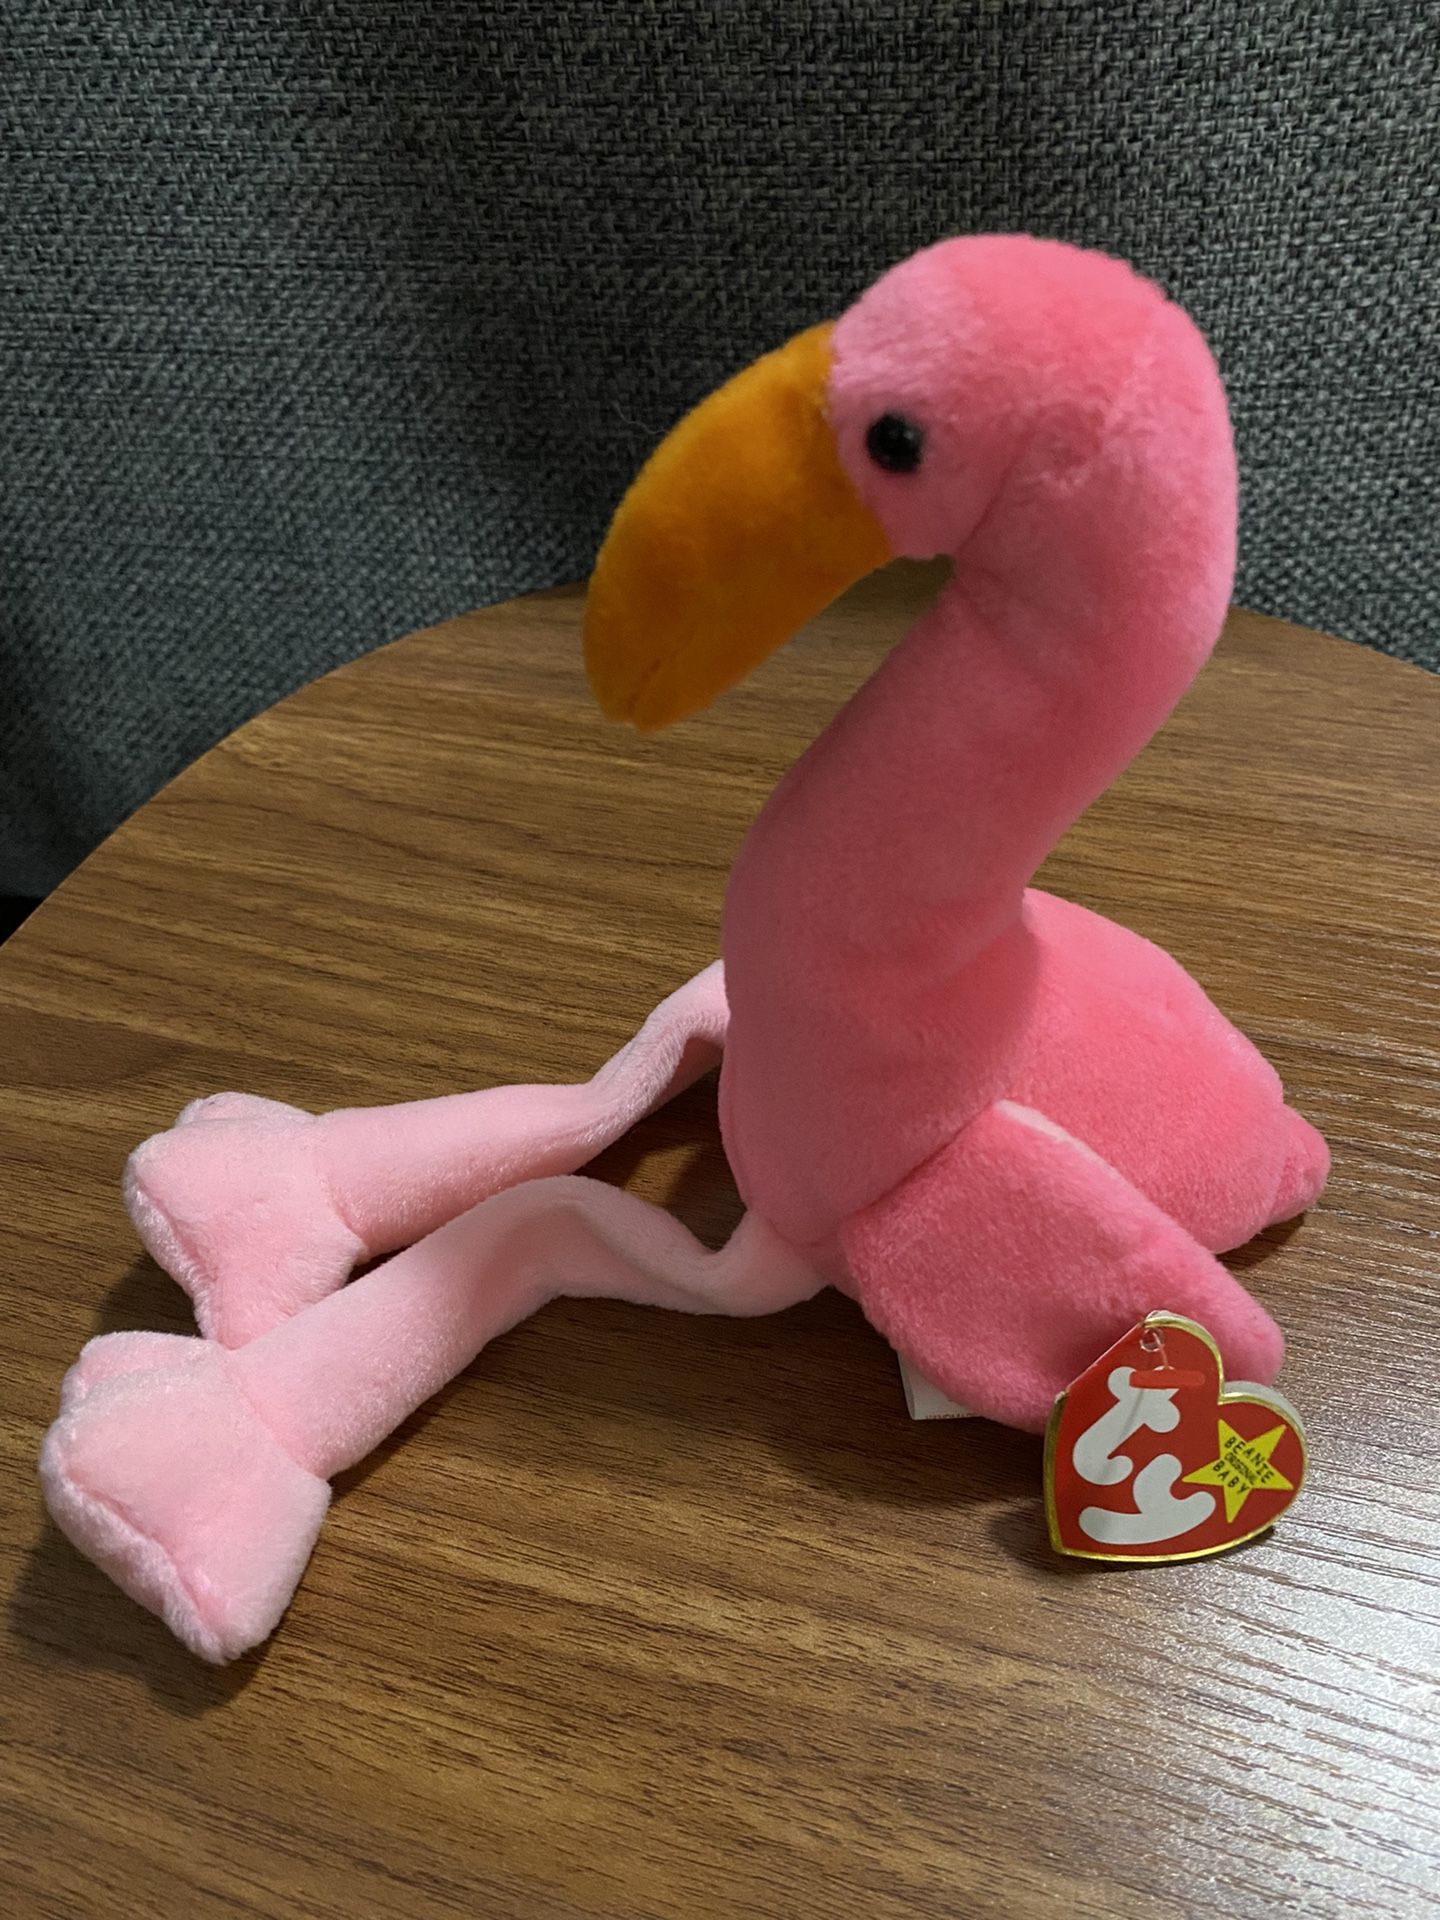 Vintage 1990s TY Beanie Baby - Pinky